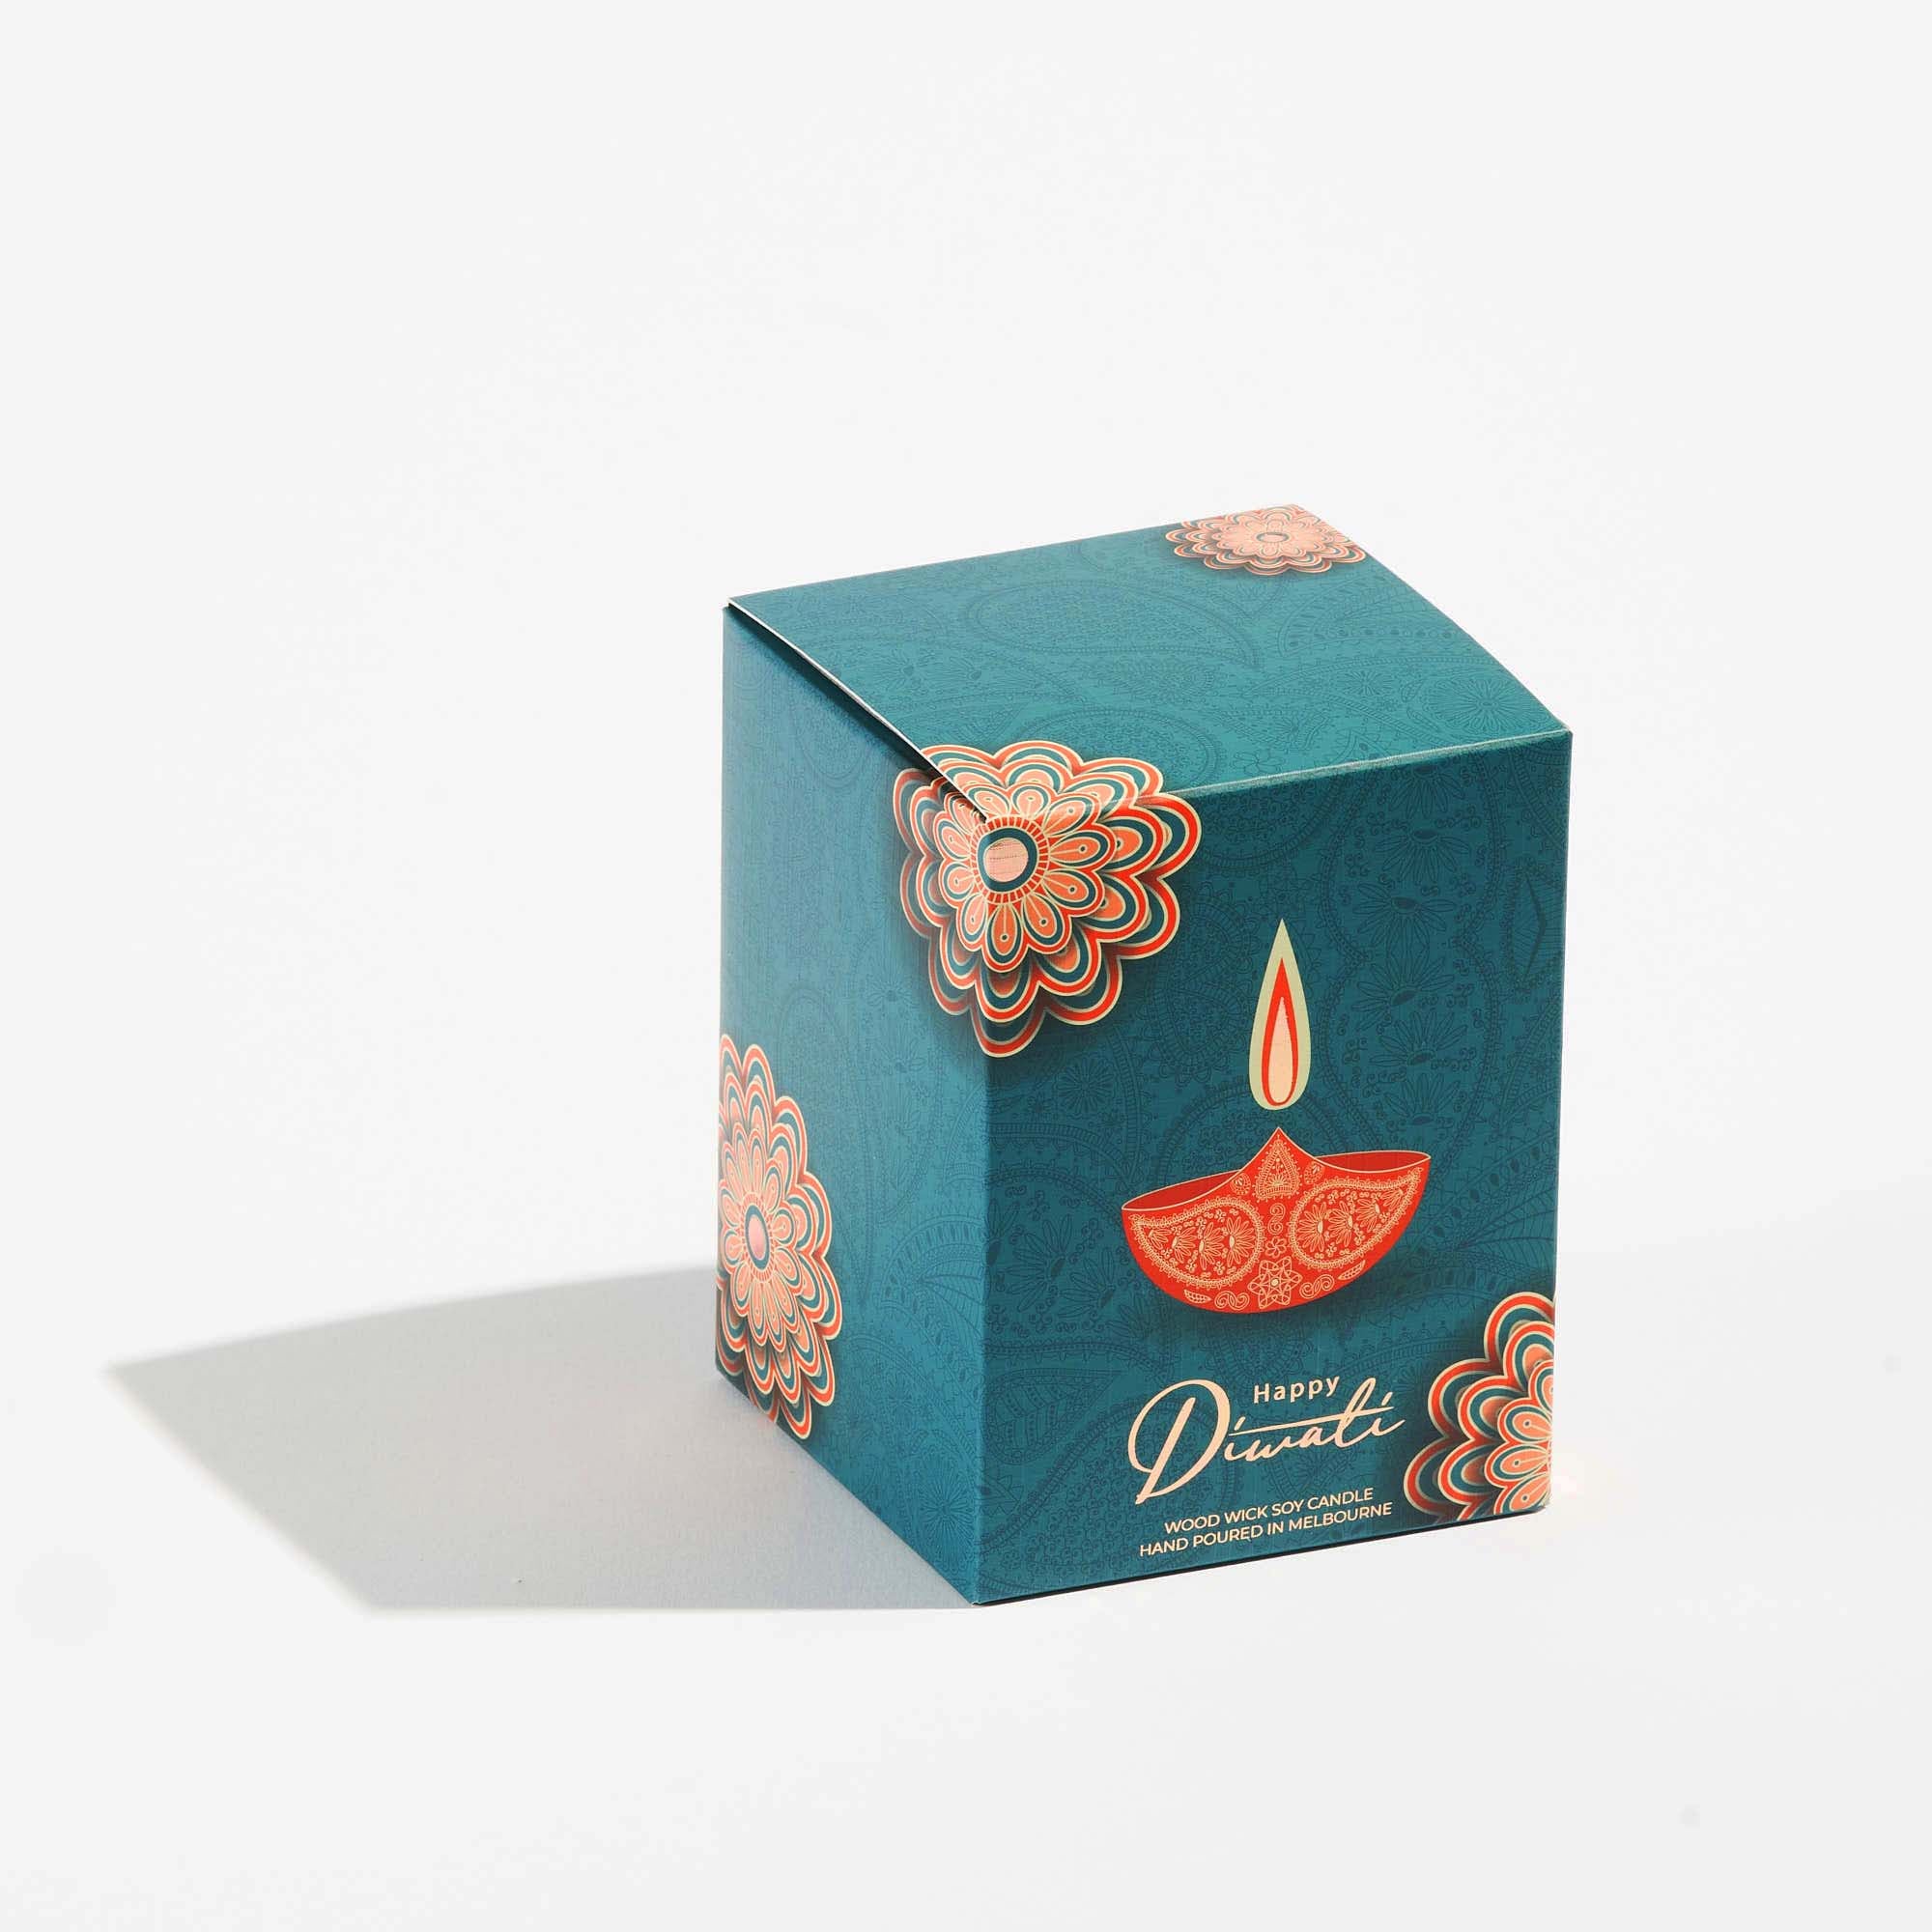 Diwali Candle | Luxury Candles & Home Fragrances by Light + Glo